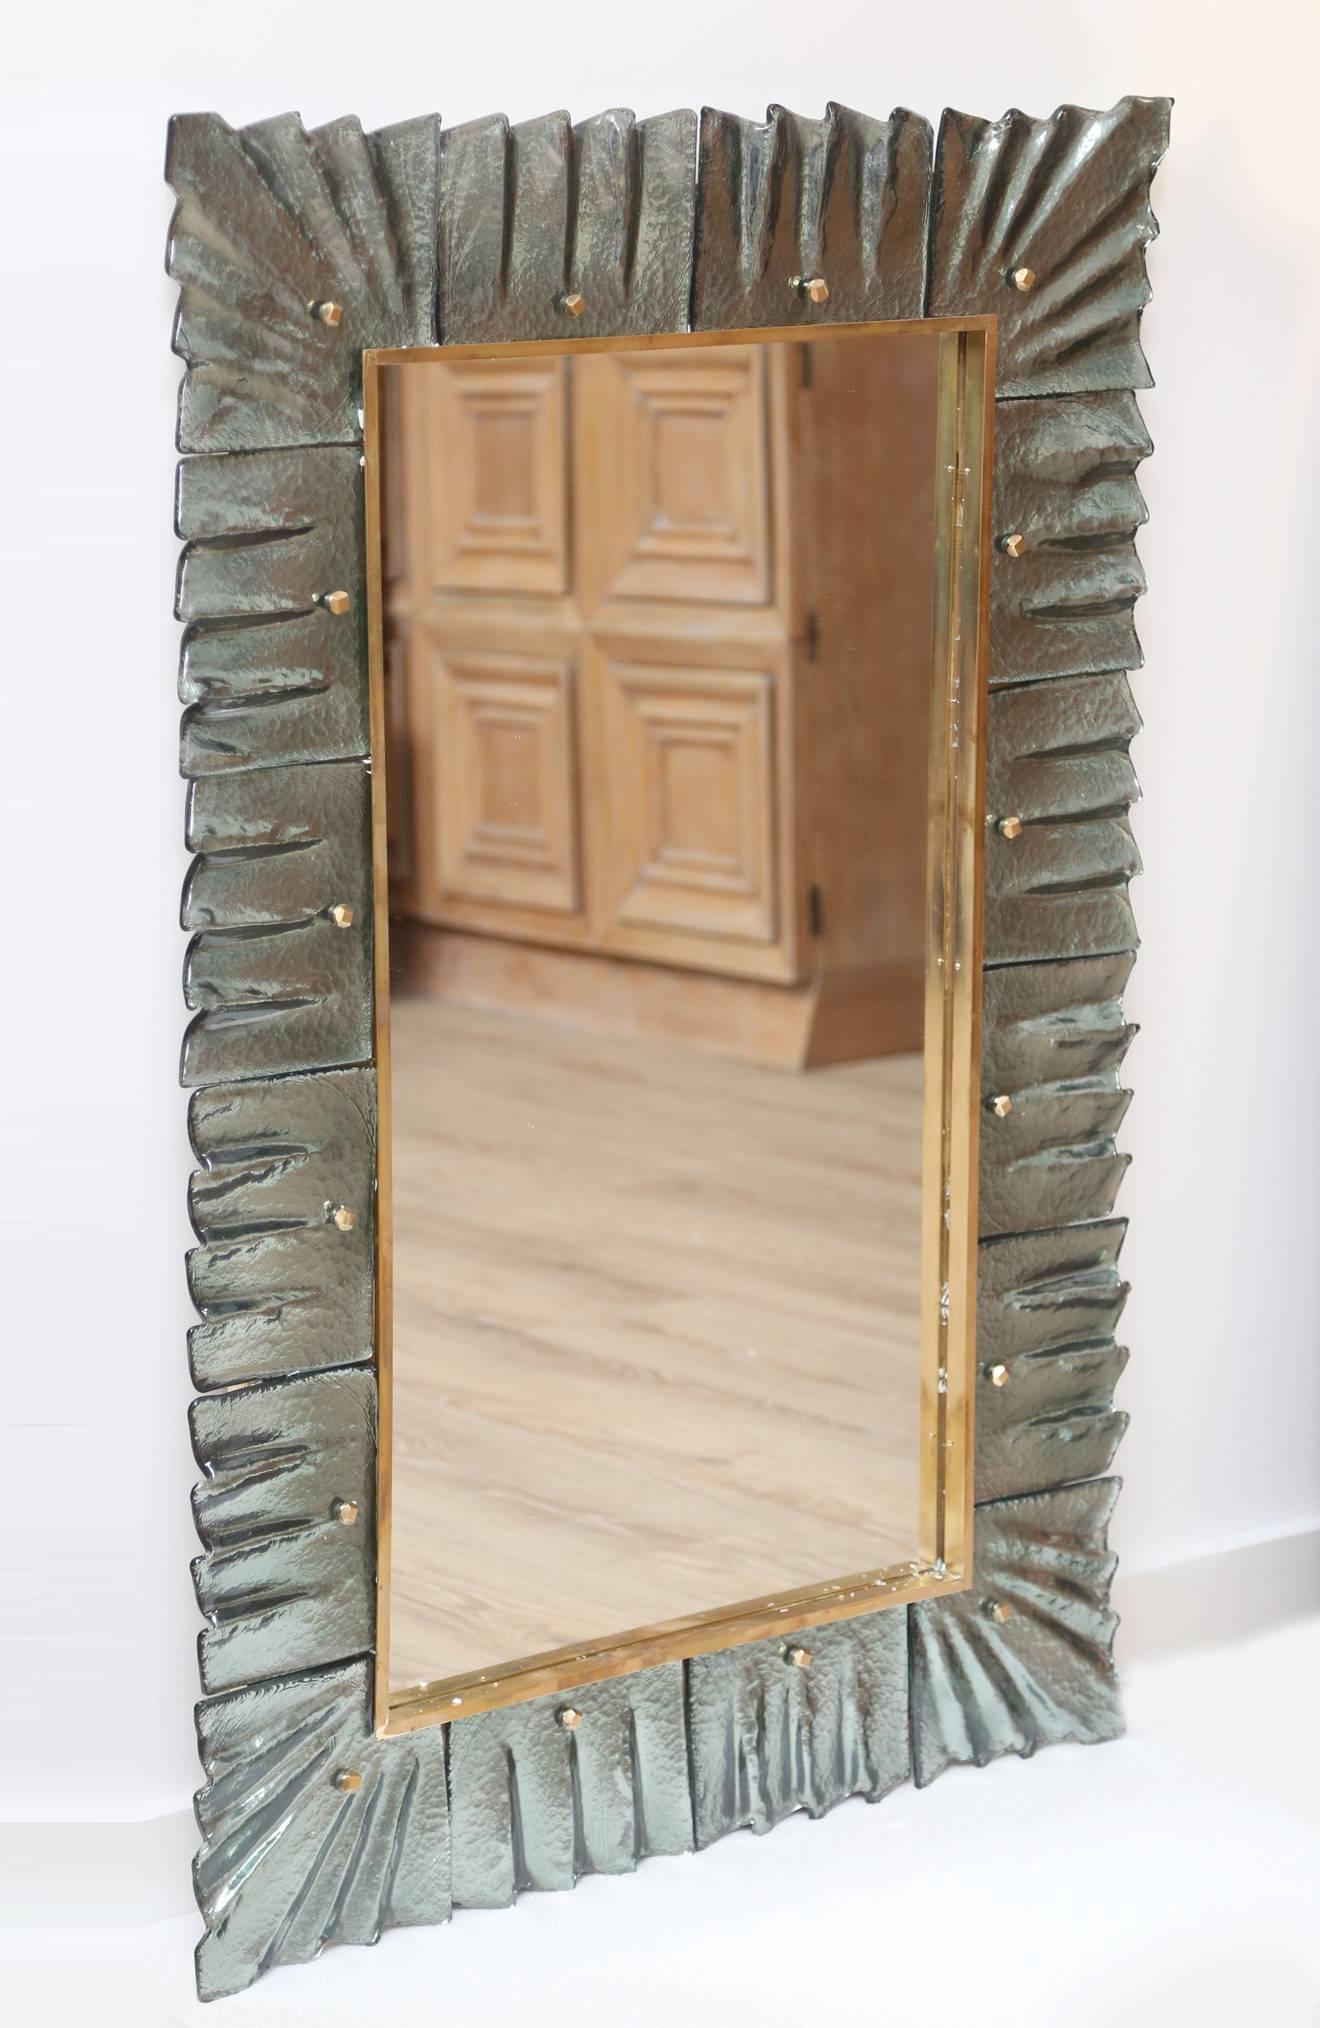 Modern aqua green Murano glass and brass decorative mirror with solid brass cabochon accents. Glass texture and color are absolutely striking. Pair is available. Priced per item. Can be hung vertical or horizontal.